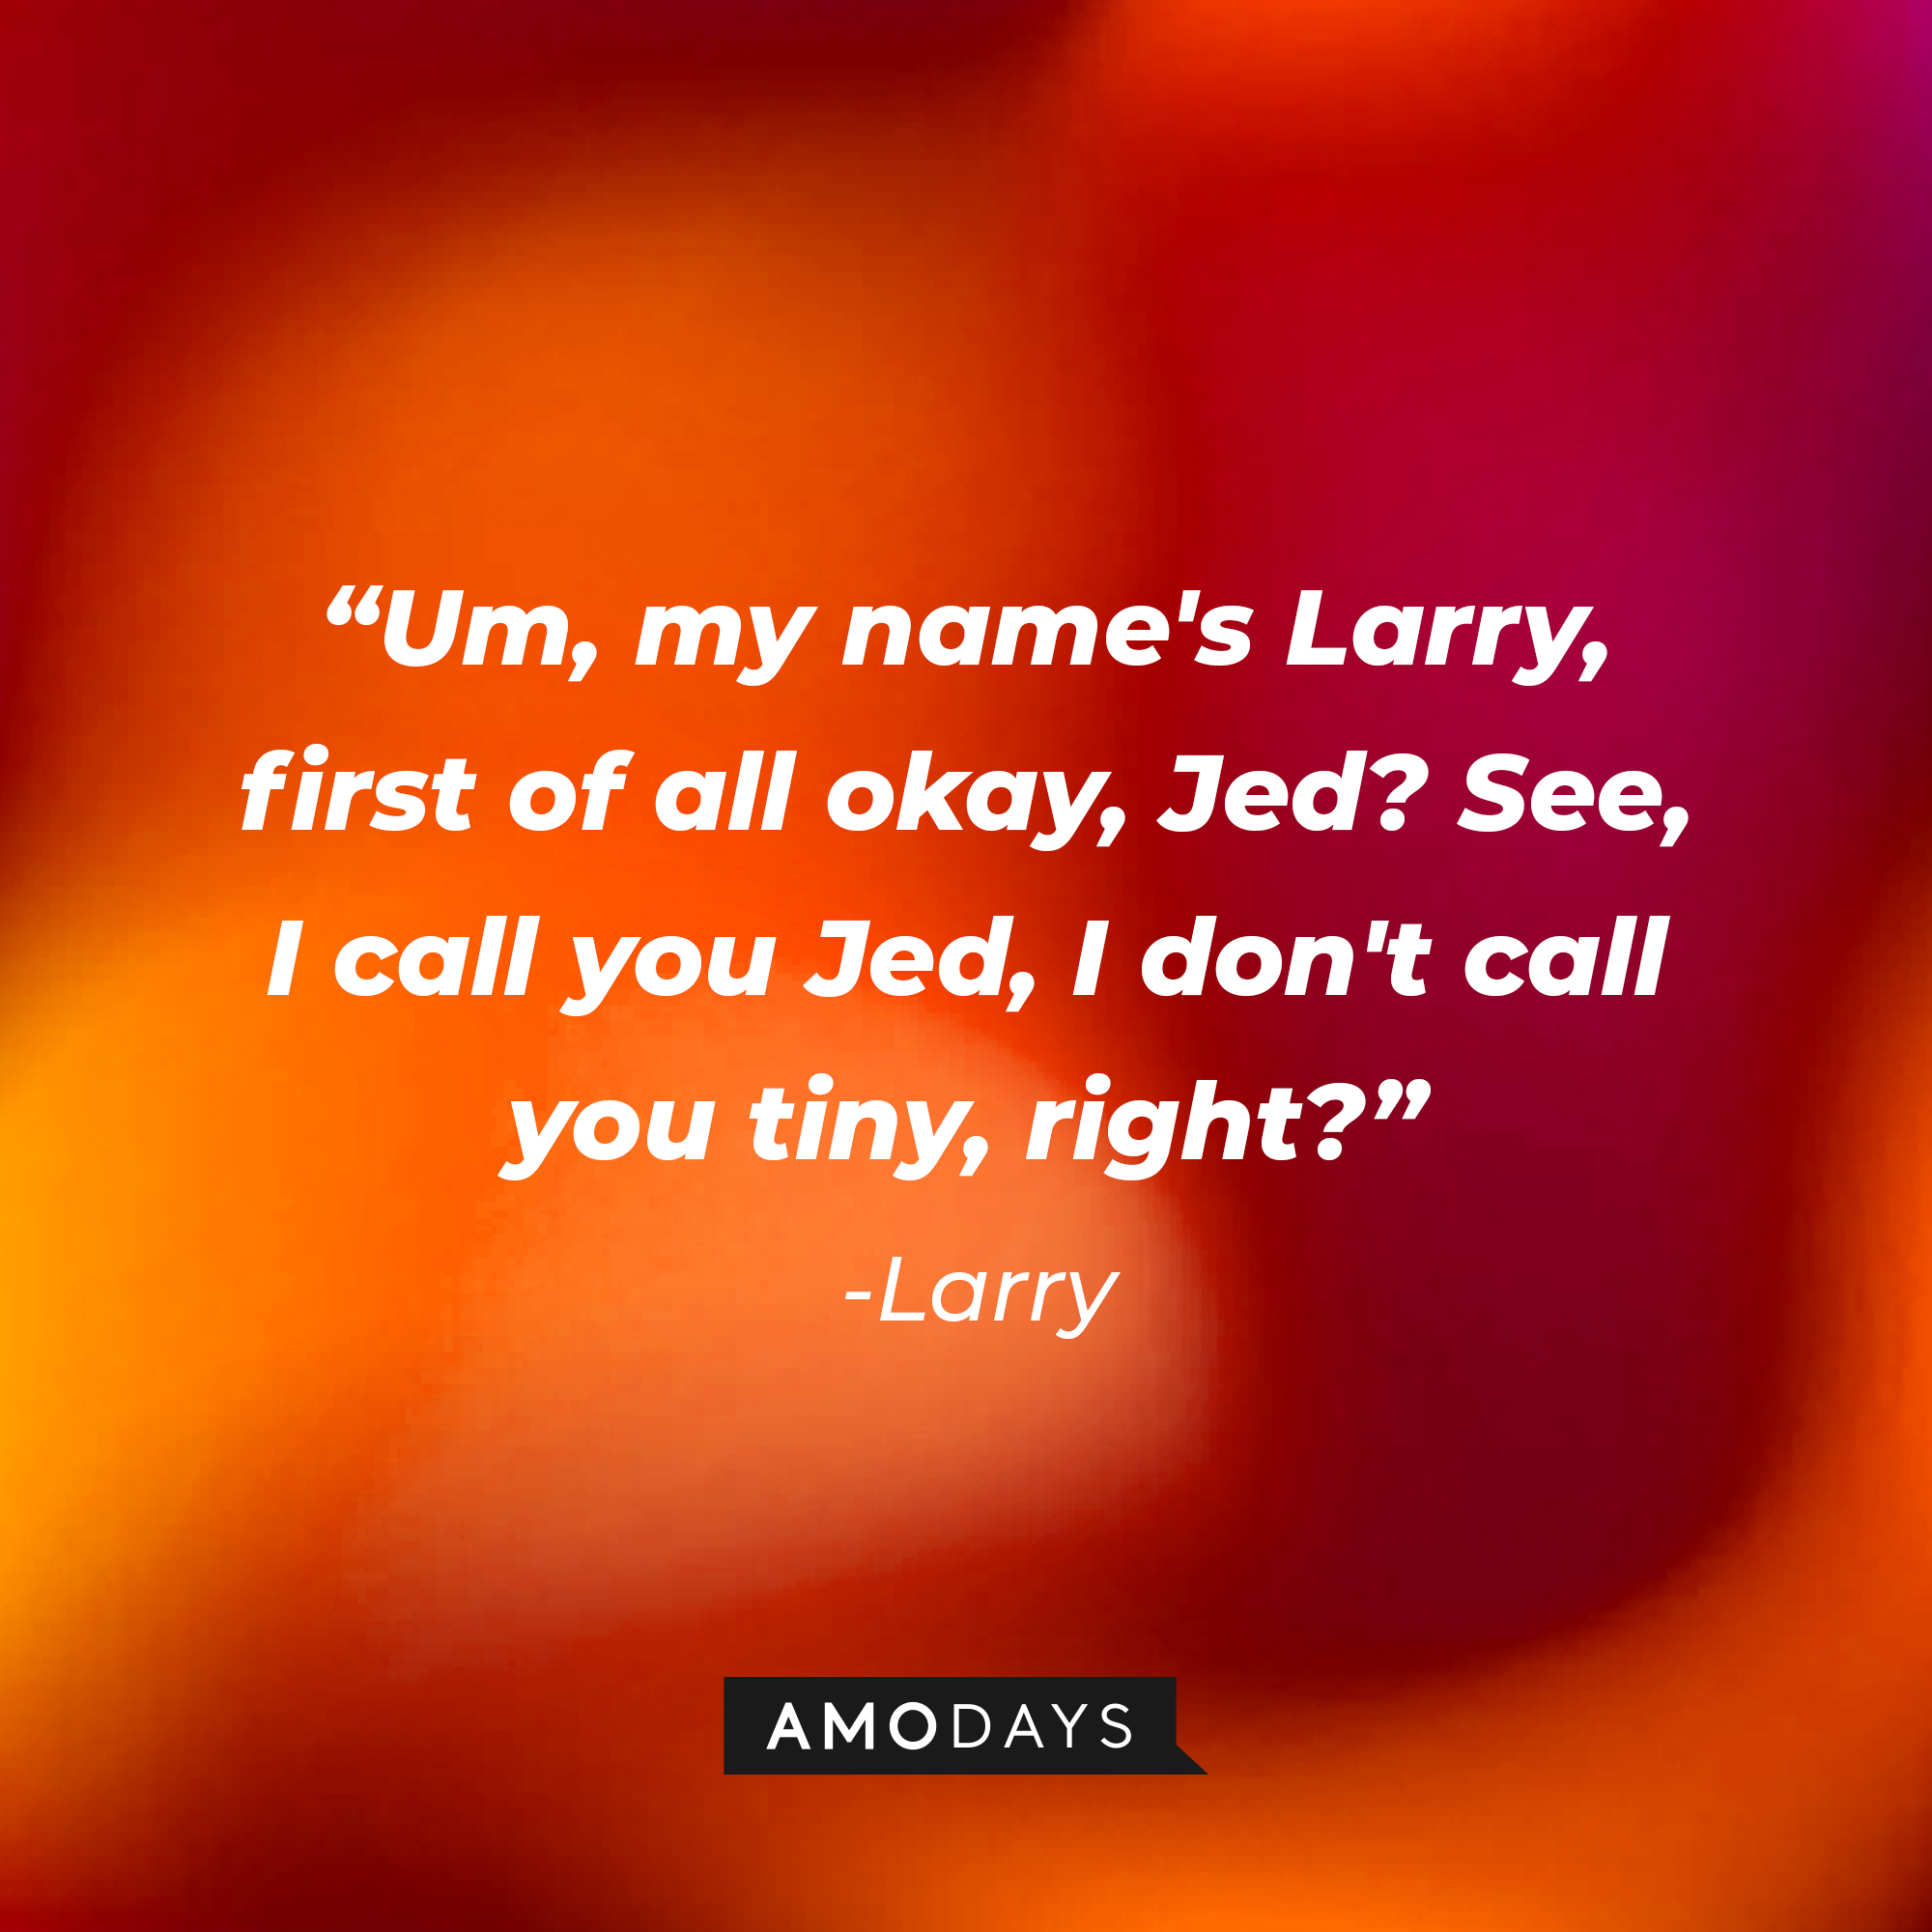 Larry's quote: “Um, my name's Larry, first of all okay, Jed? See, I call you Jed, I don't call you tiny, right?” | Source: Amodays